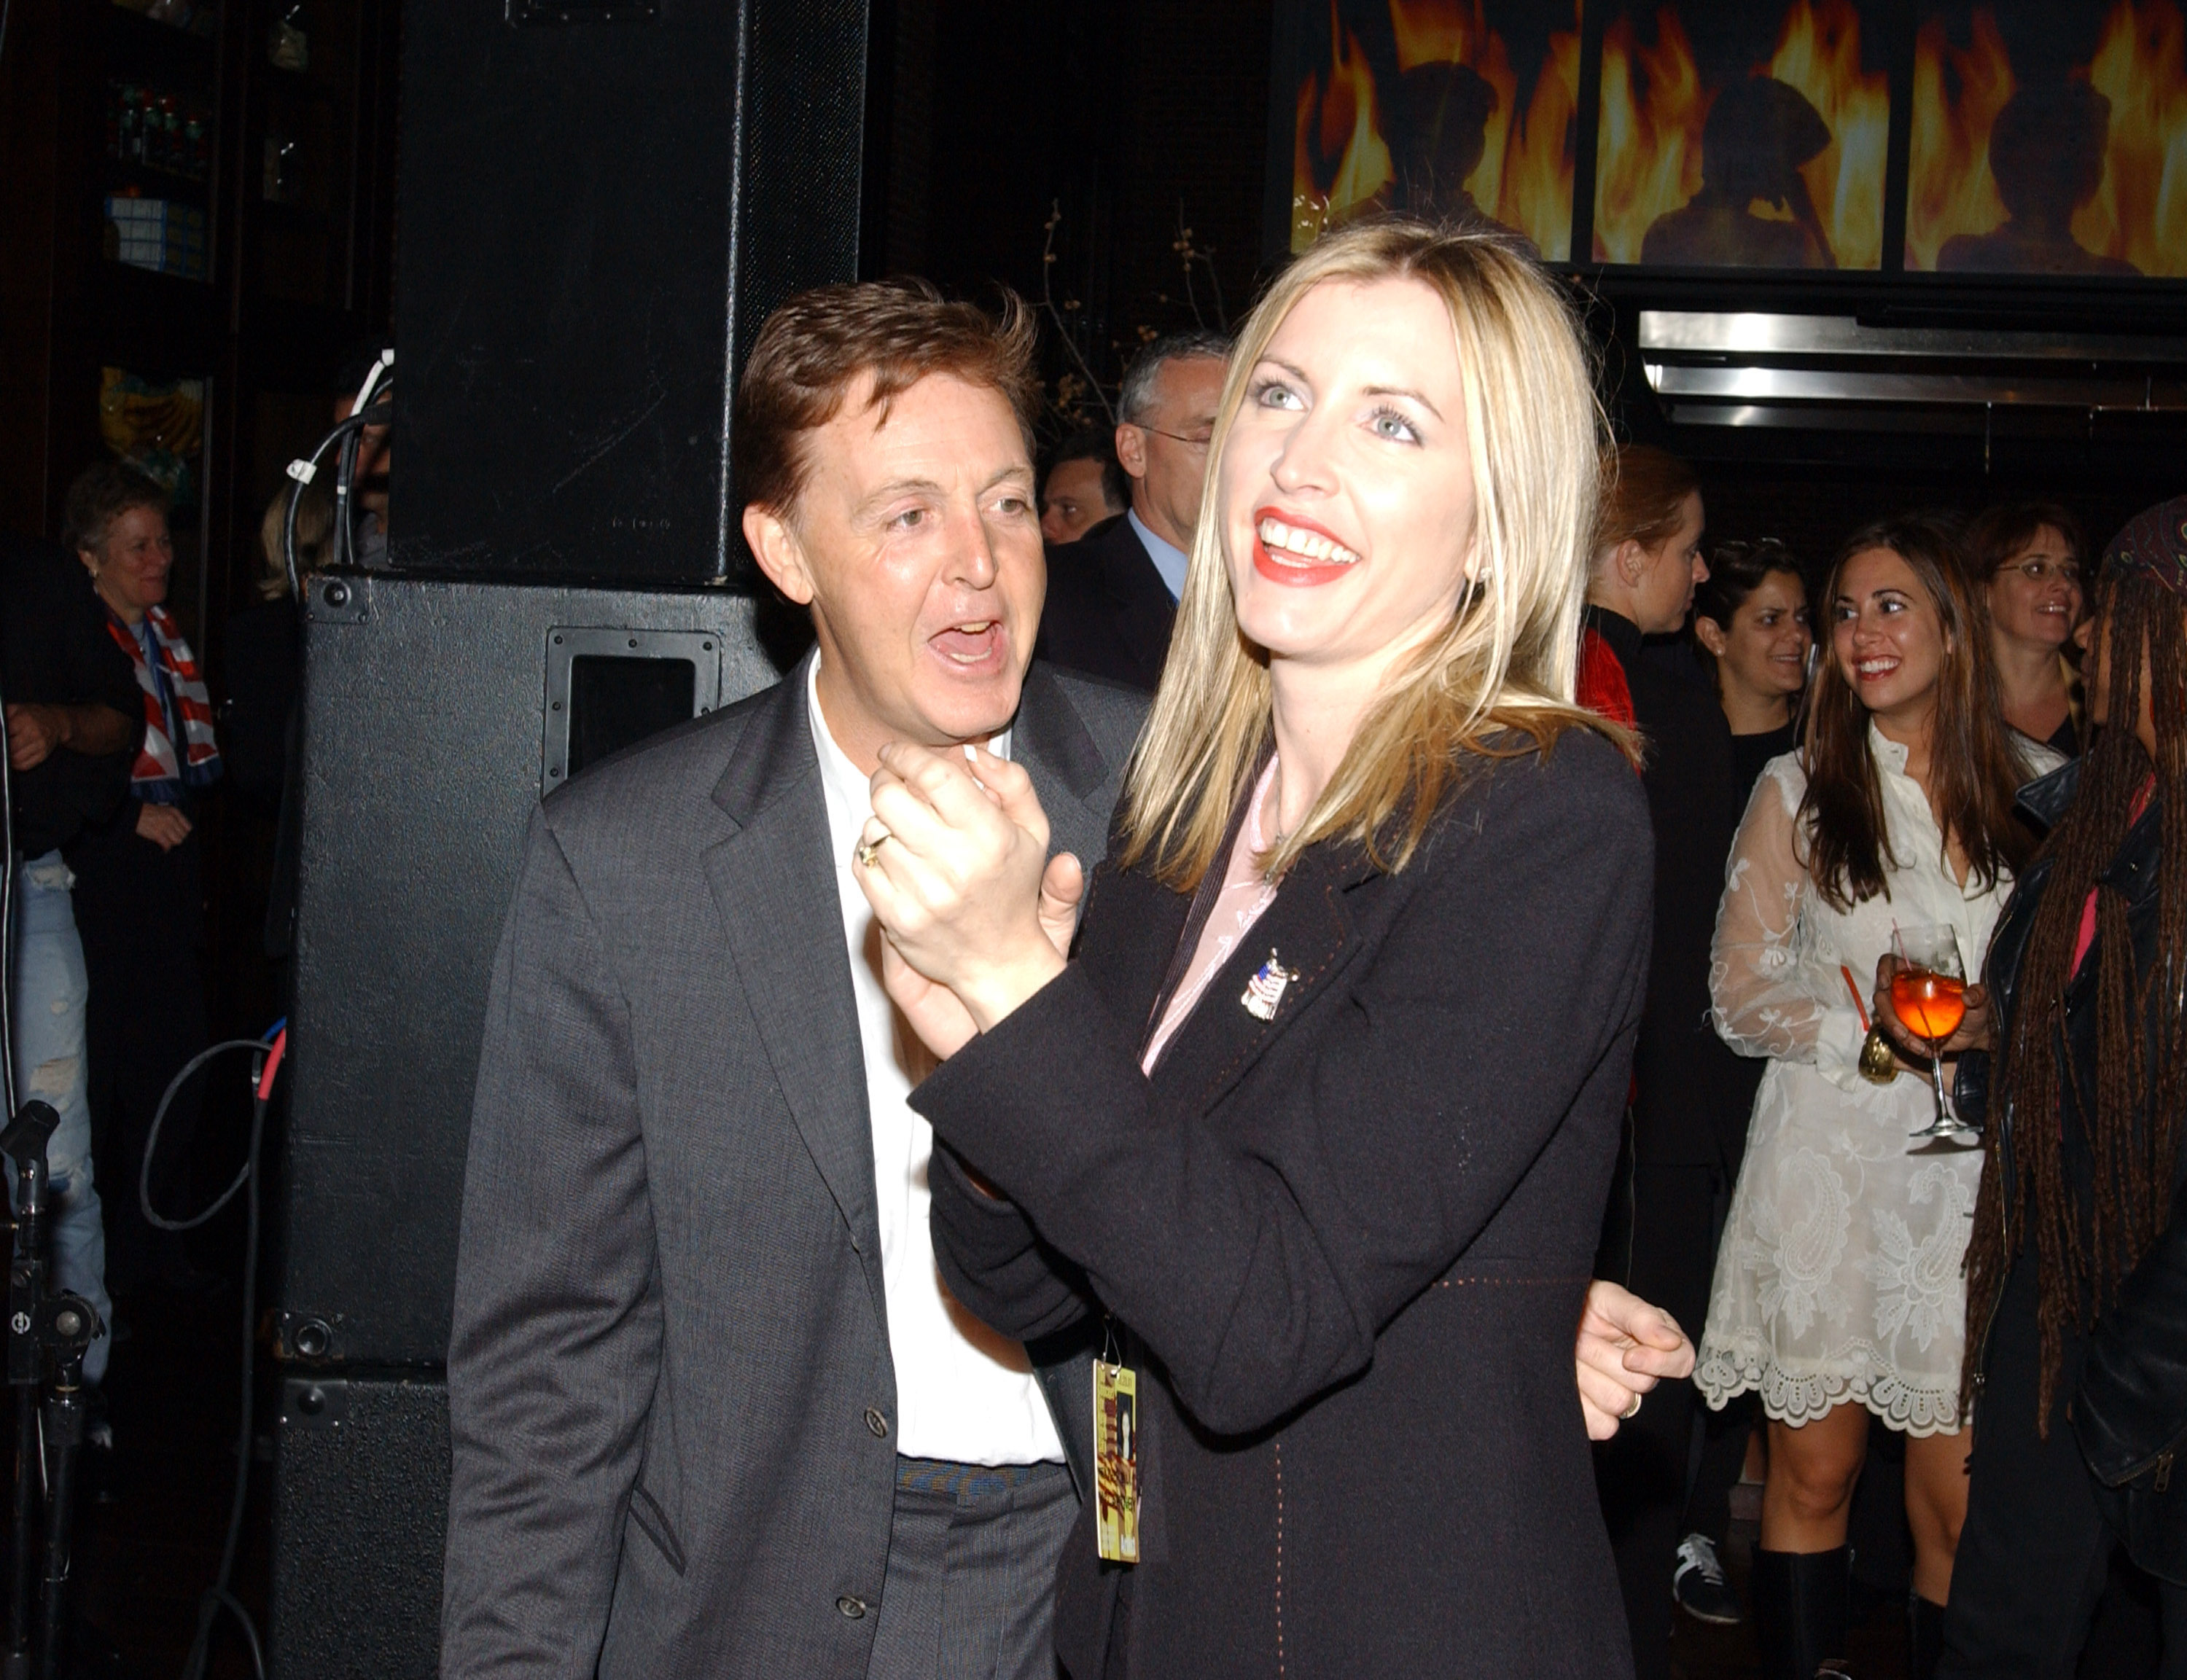 Paul McCartney and Heather Mills attend The Concert for New York City on October 20, 2001 in New York City | Source: Getty Images